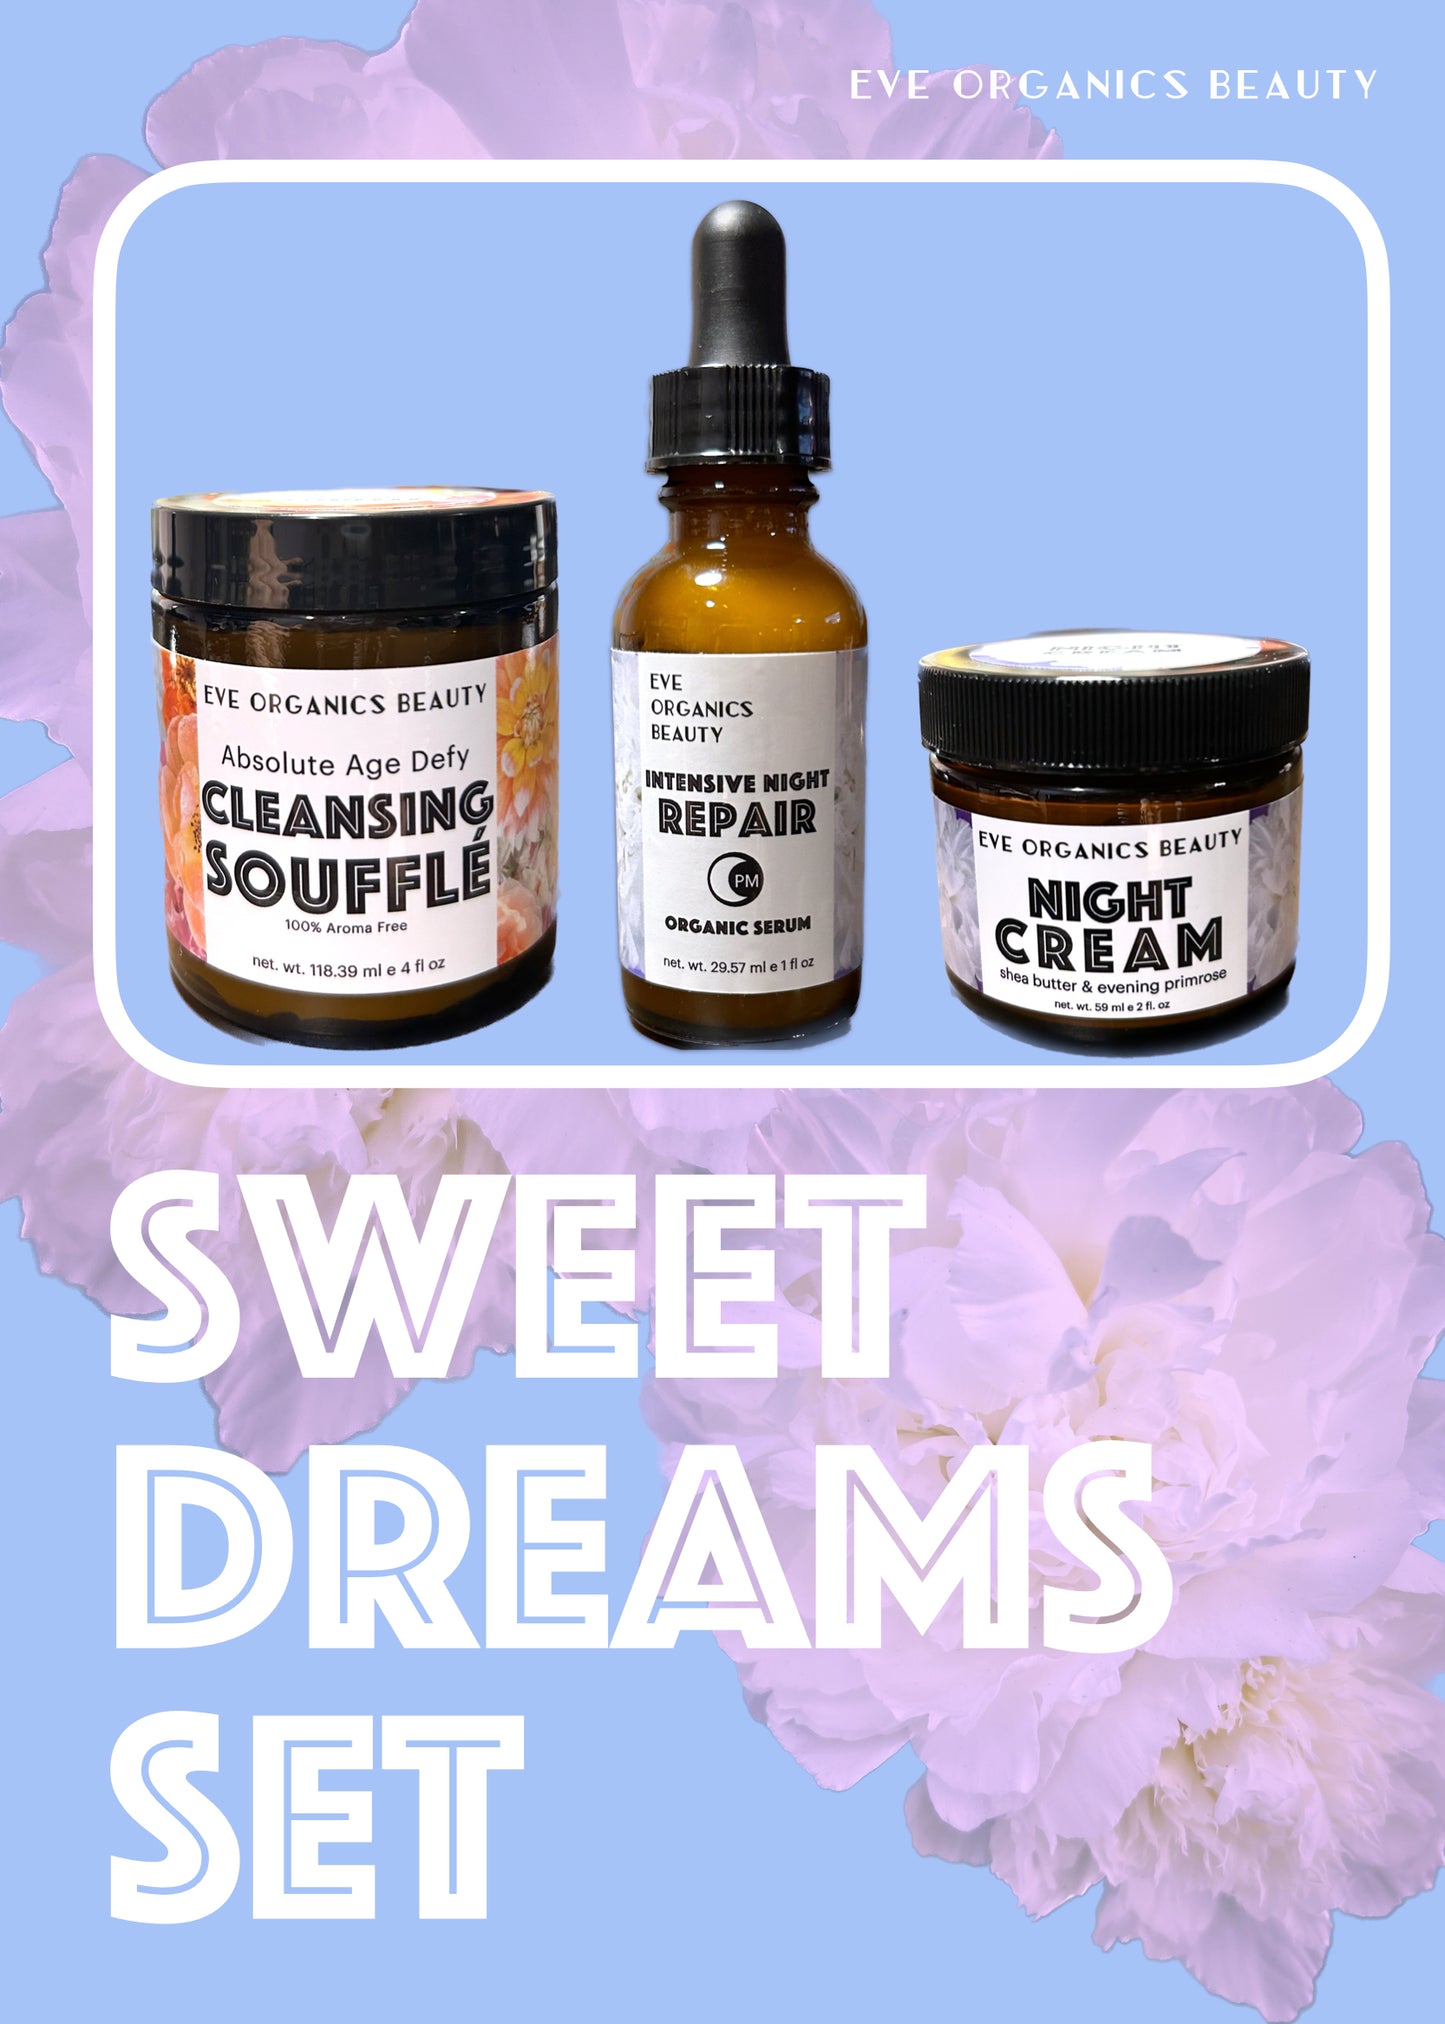 SWEET DREAMS SKINCARE BUNDLE WITH CLEANSING SOUFFLE, INTENSIVE NIGHT REPAIR ORGANIC SERUM AND CHOOSE EITHER NIGHT CREAM OR AROMA FREE NIGHT CREAM